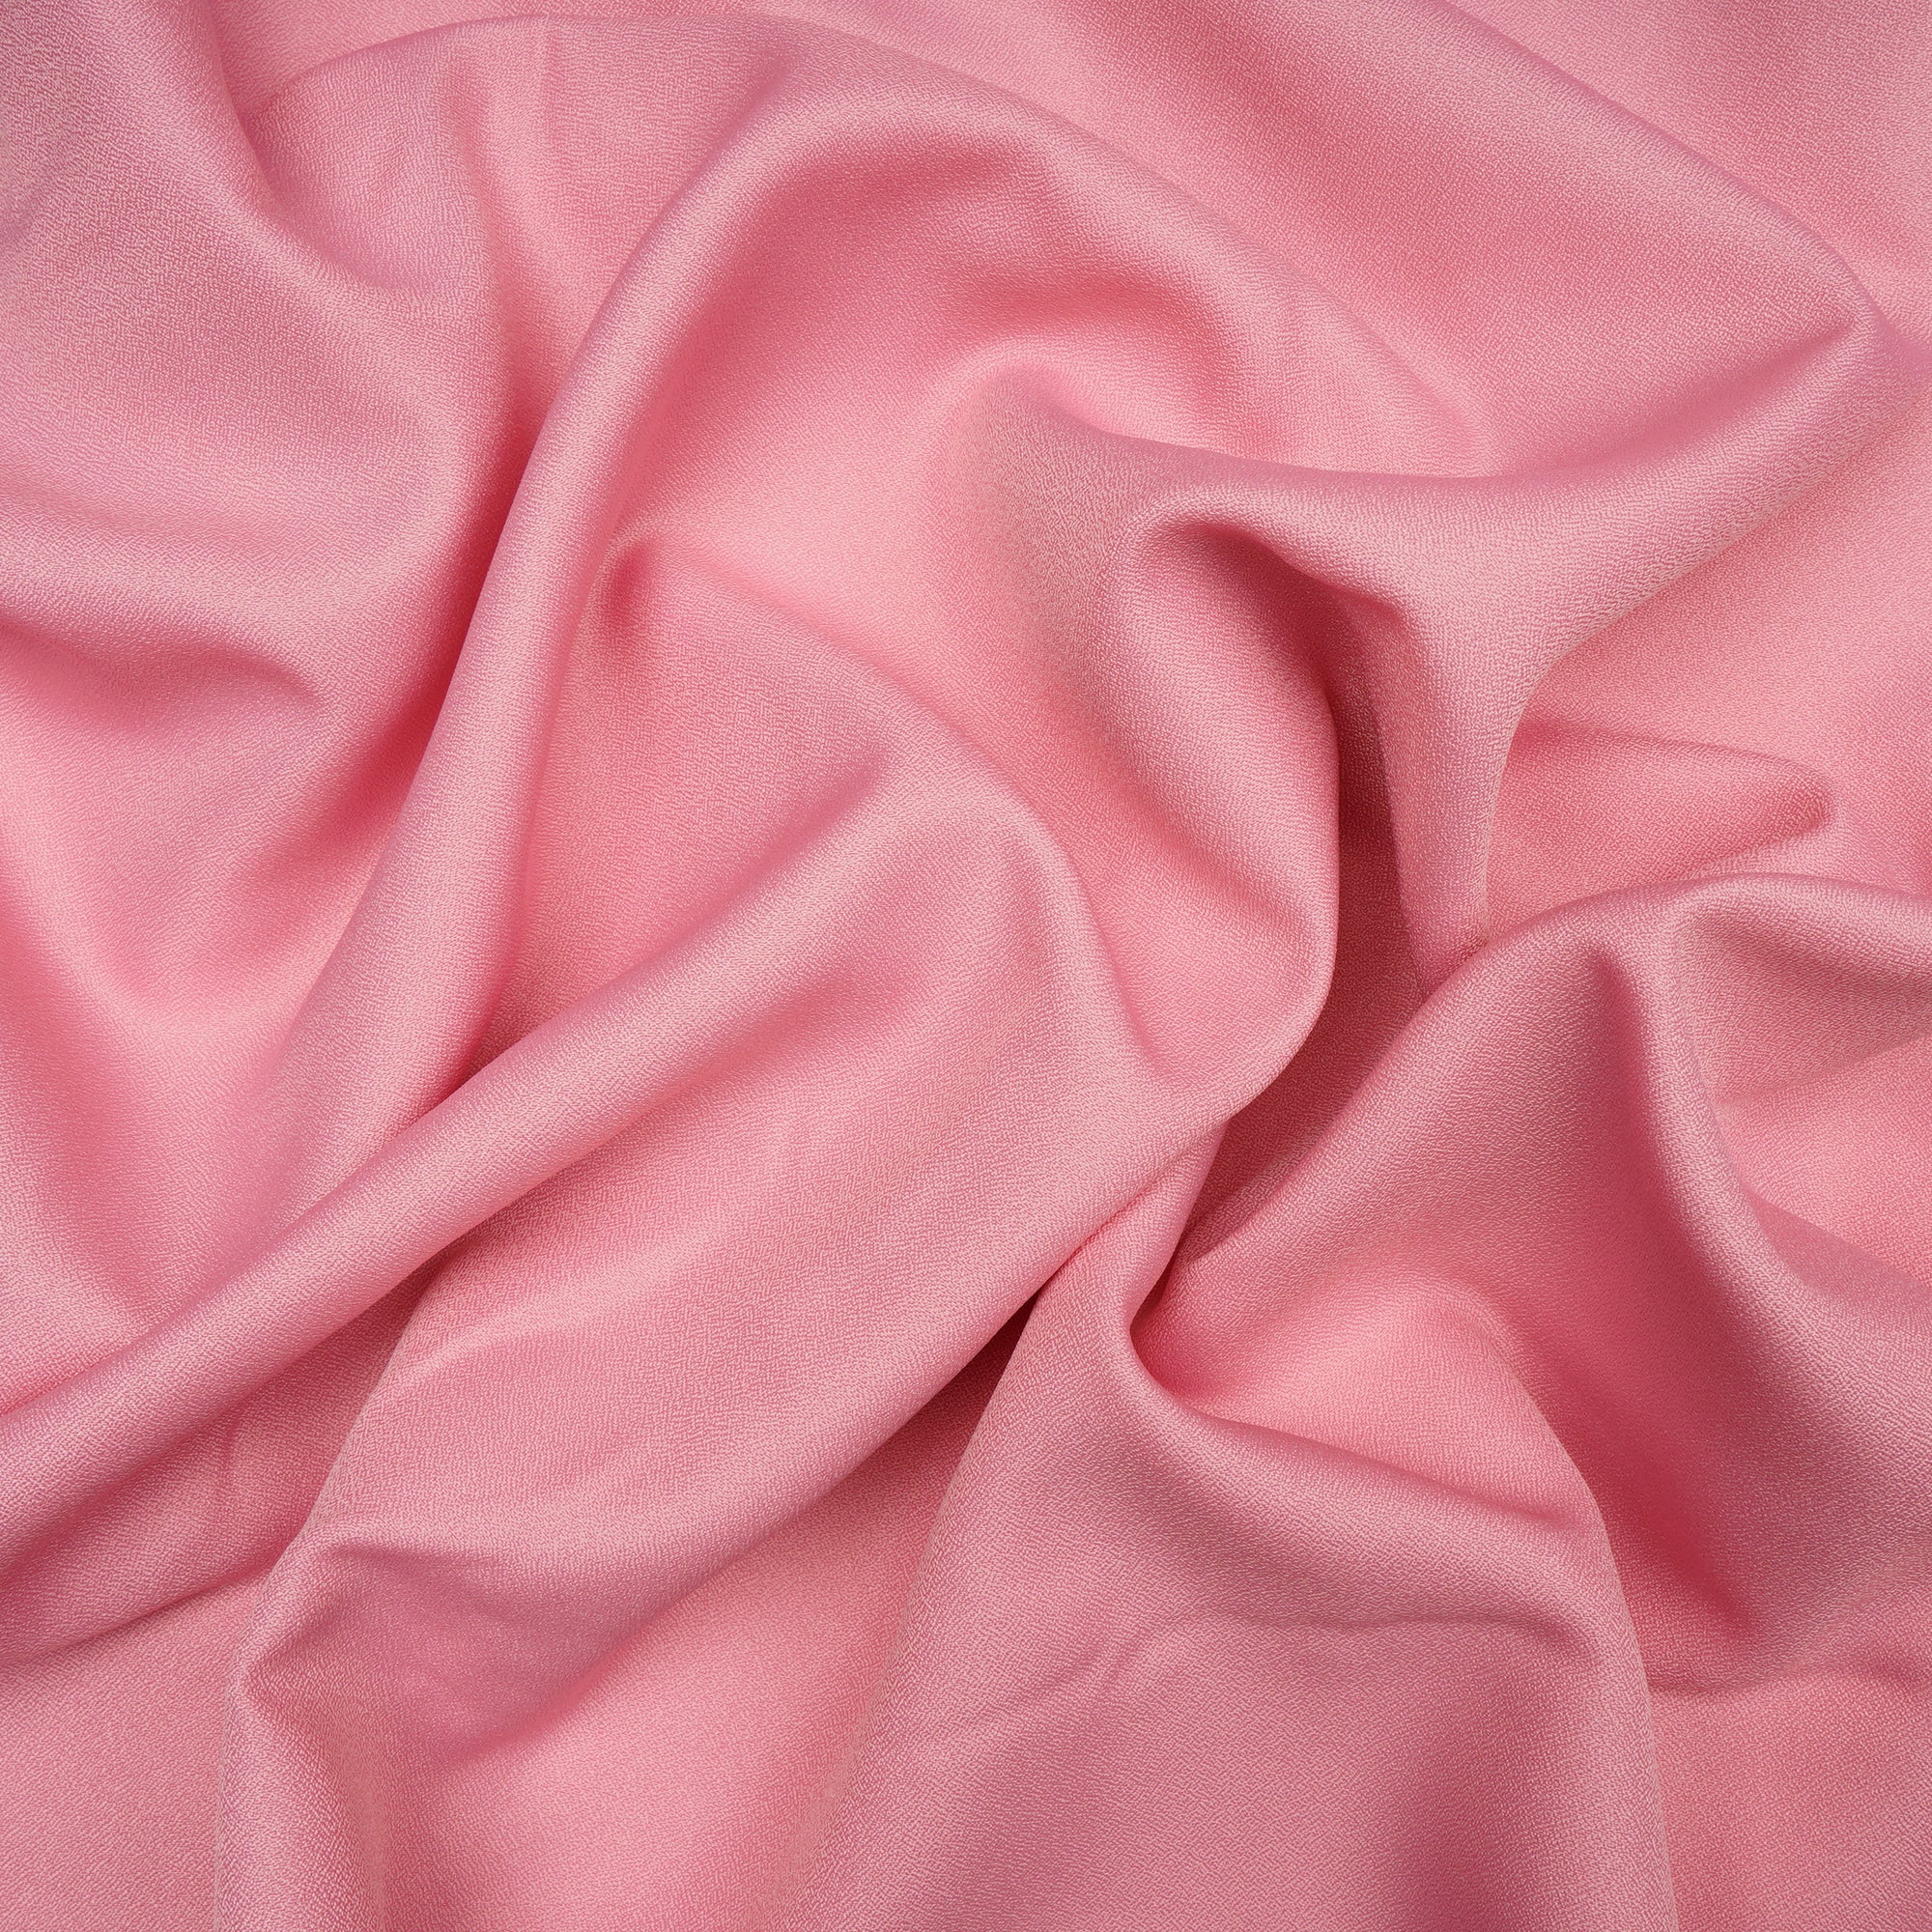 Geranium Pink Solid Dyed Imported Amazon Moss Crepe Fabric (60" Width)